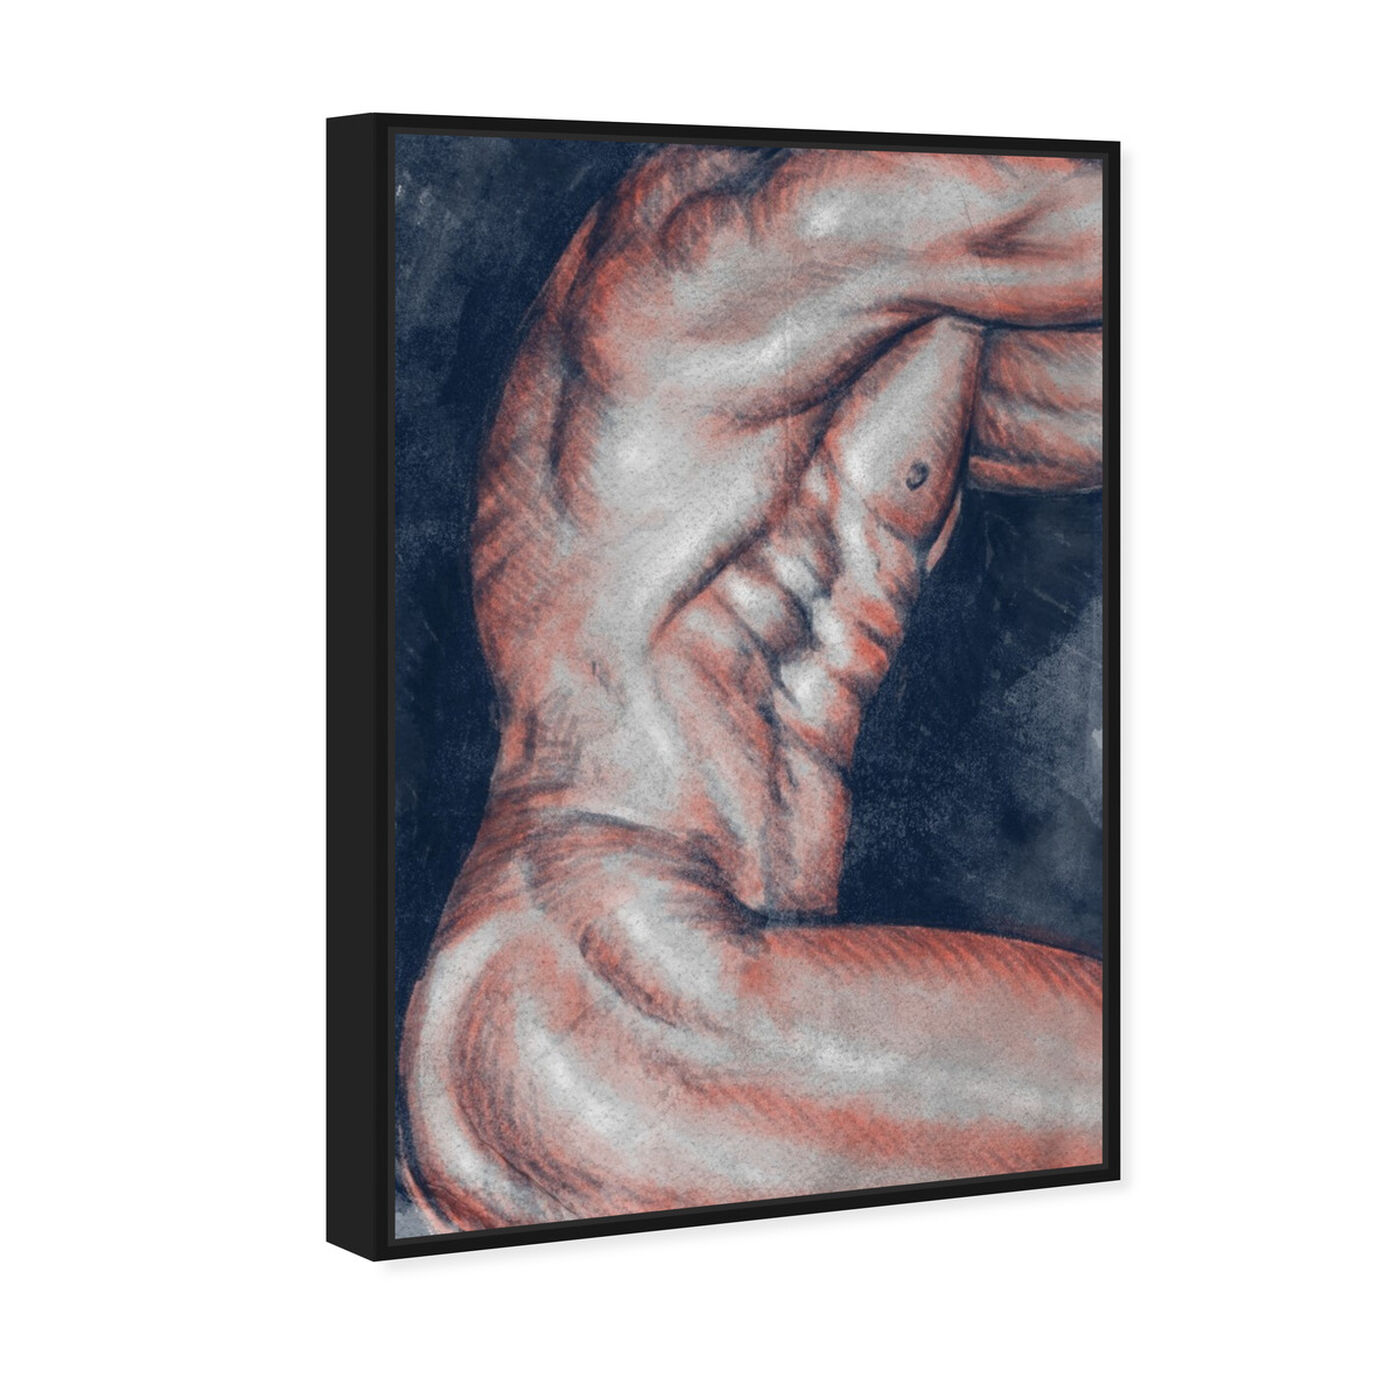 Angled view of Musculature featuring people and portraits and nudes art.